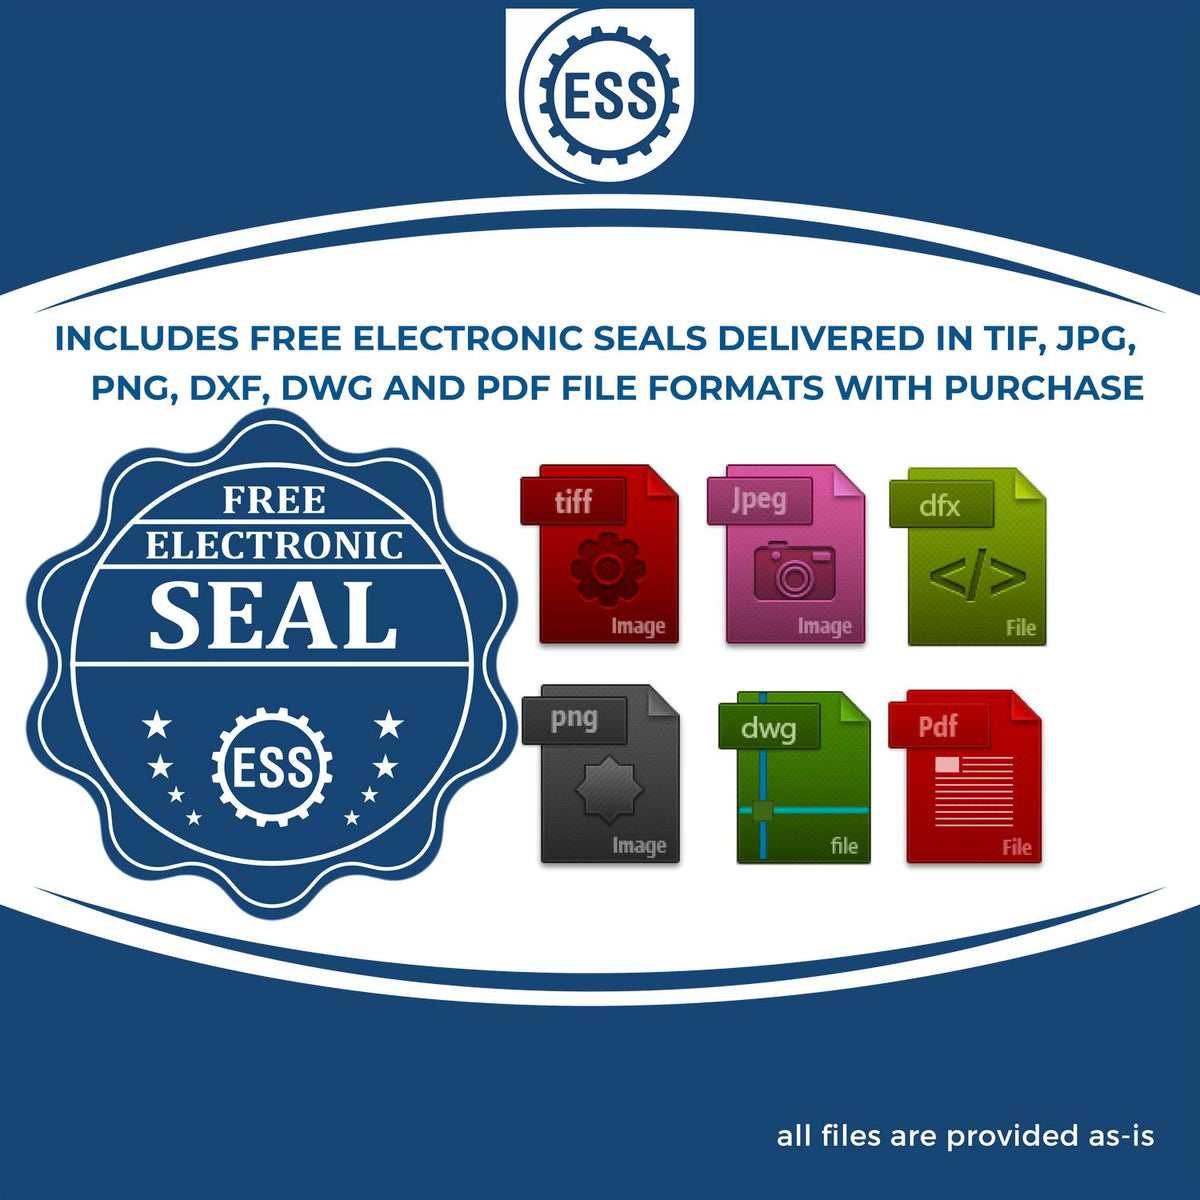 An infographic for the free electronic seal for the Slim Pre-Inked Minnesota Architect Seal Stamp illustrating the different file type icons such as DXF, DWG, TIF, JPG and PNG.